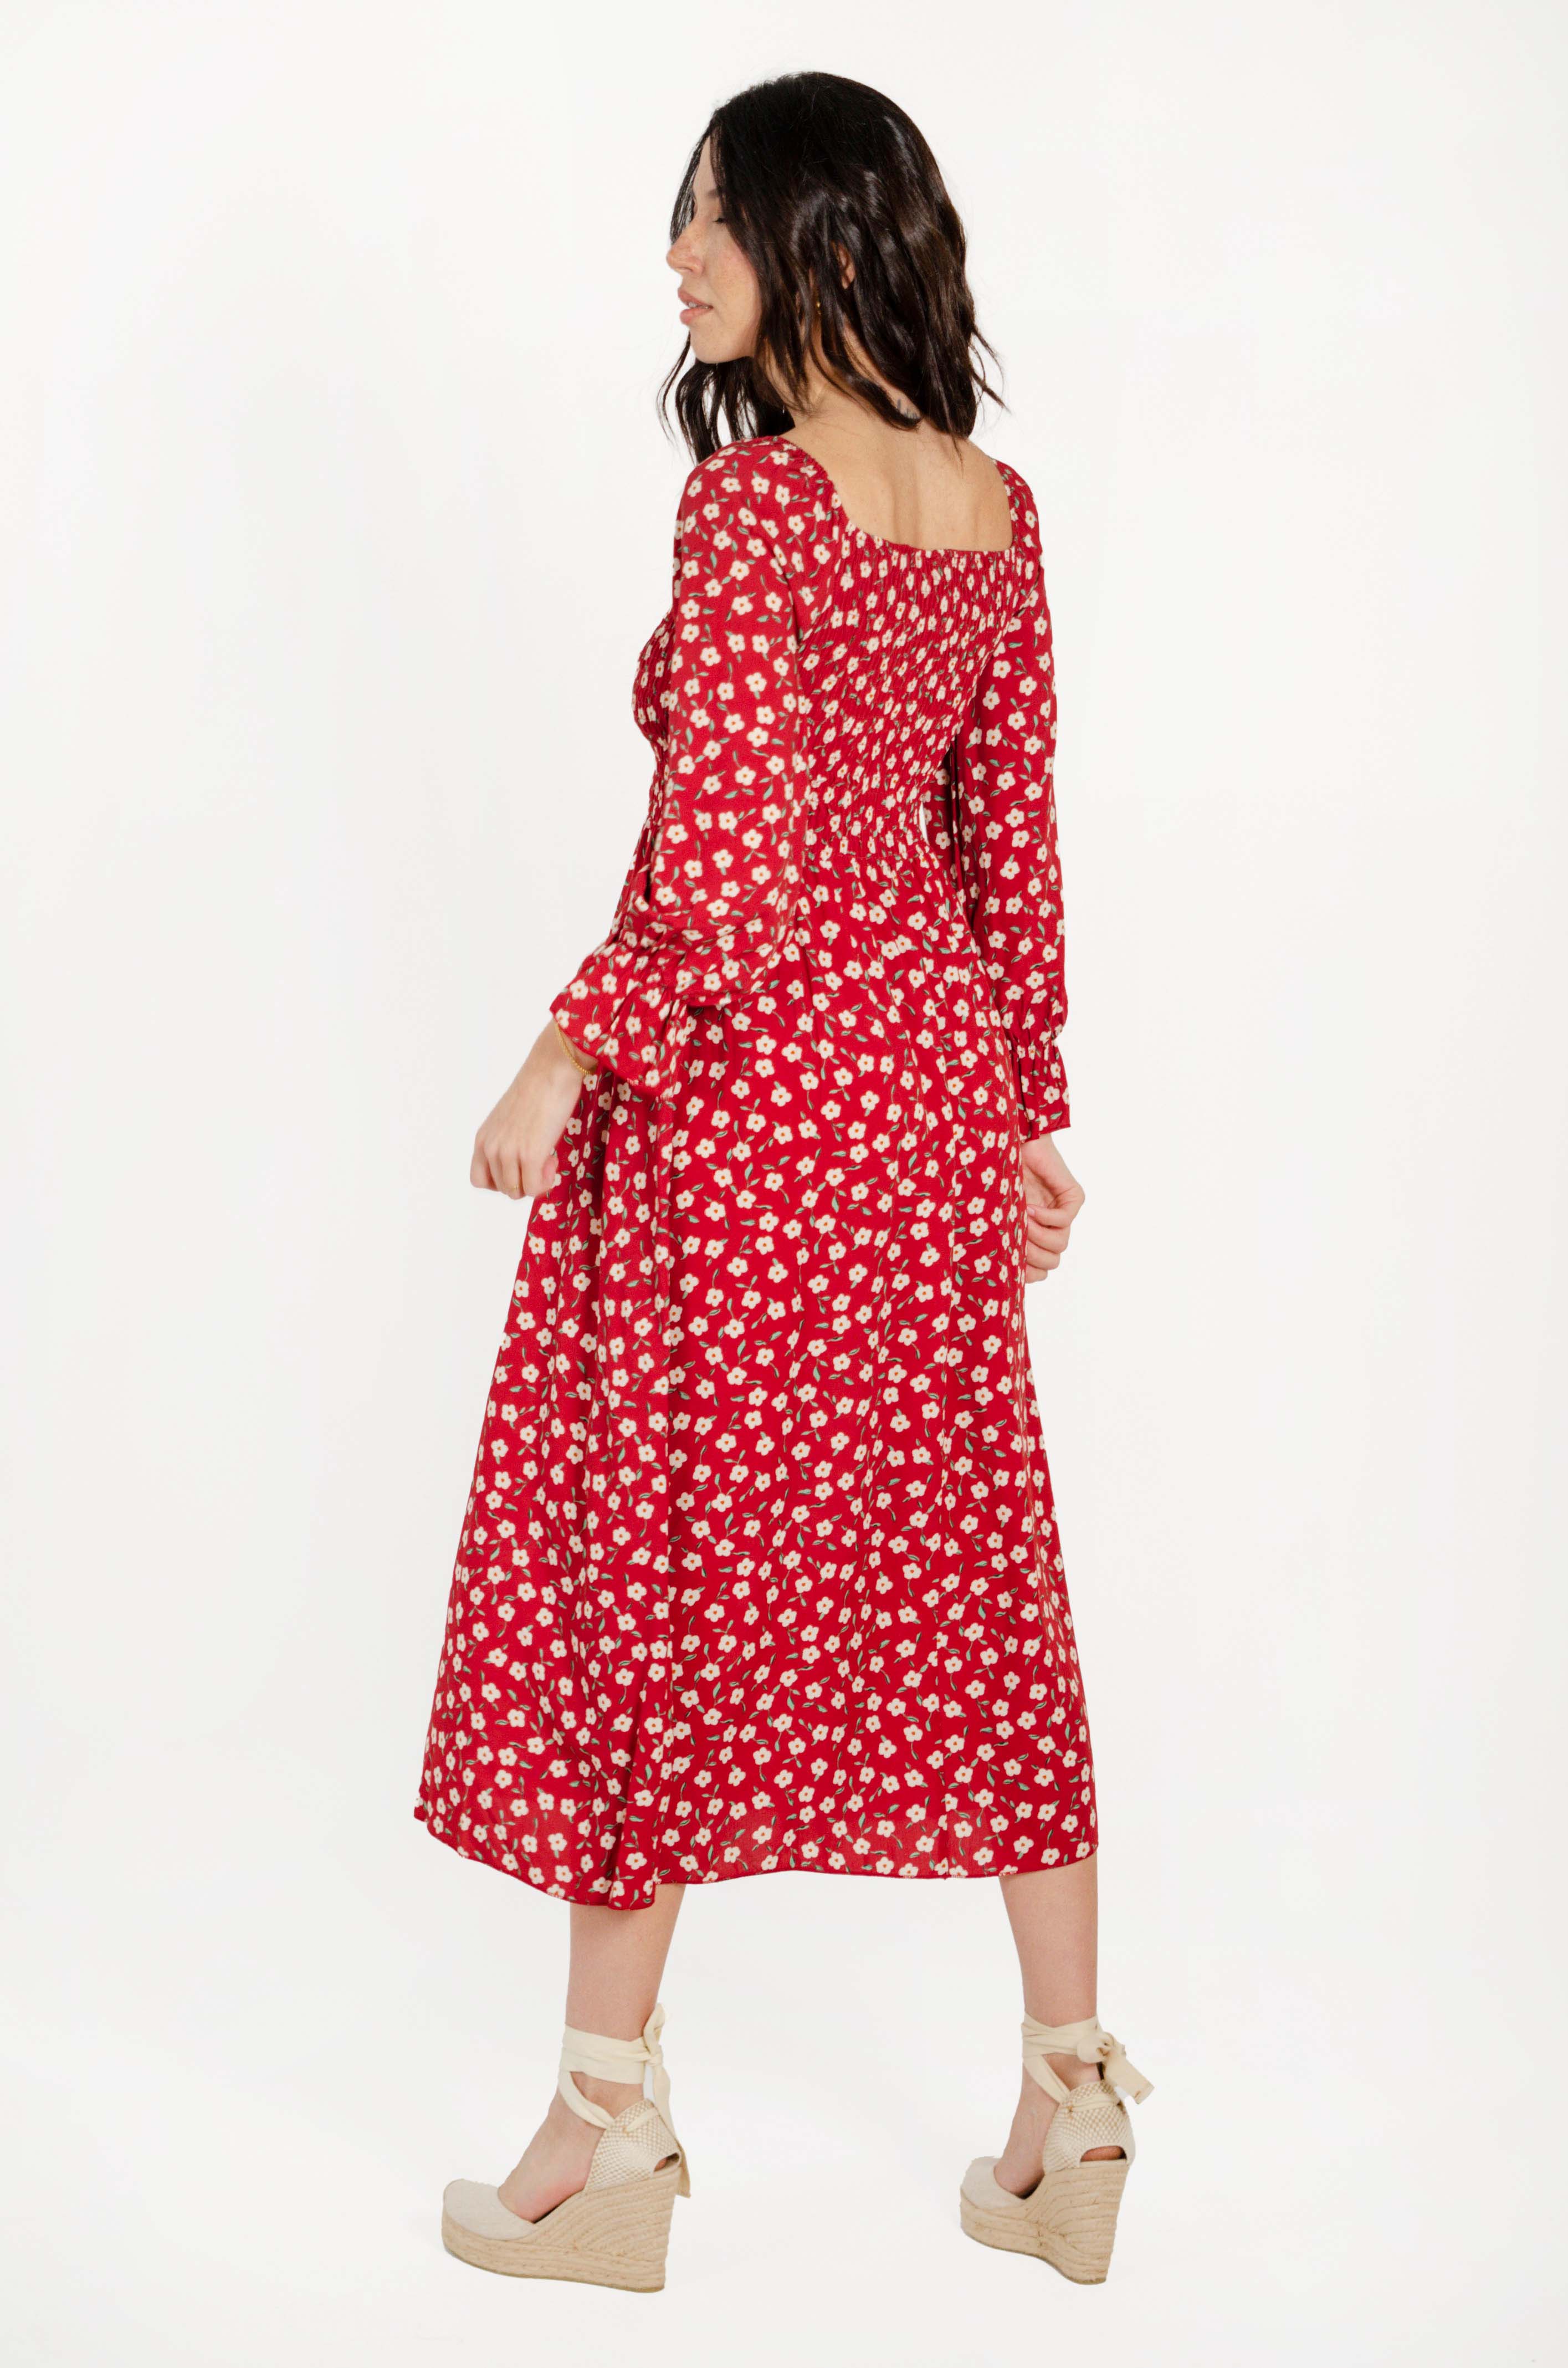 ALICIA DRESS // RED FLOWERS